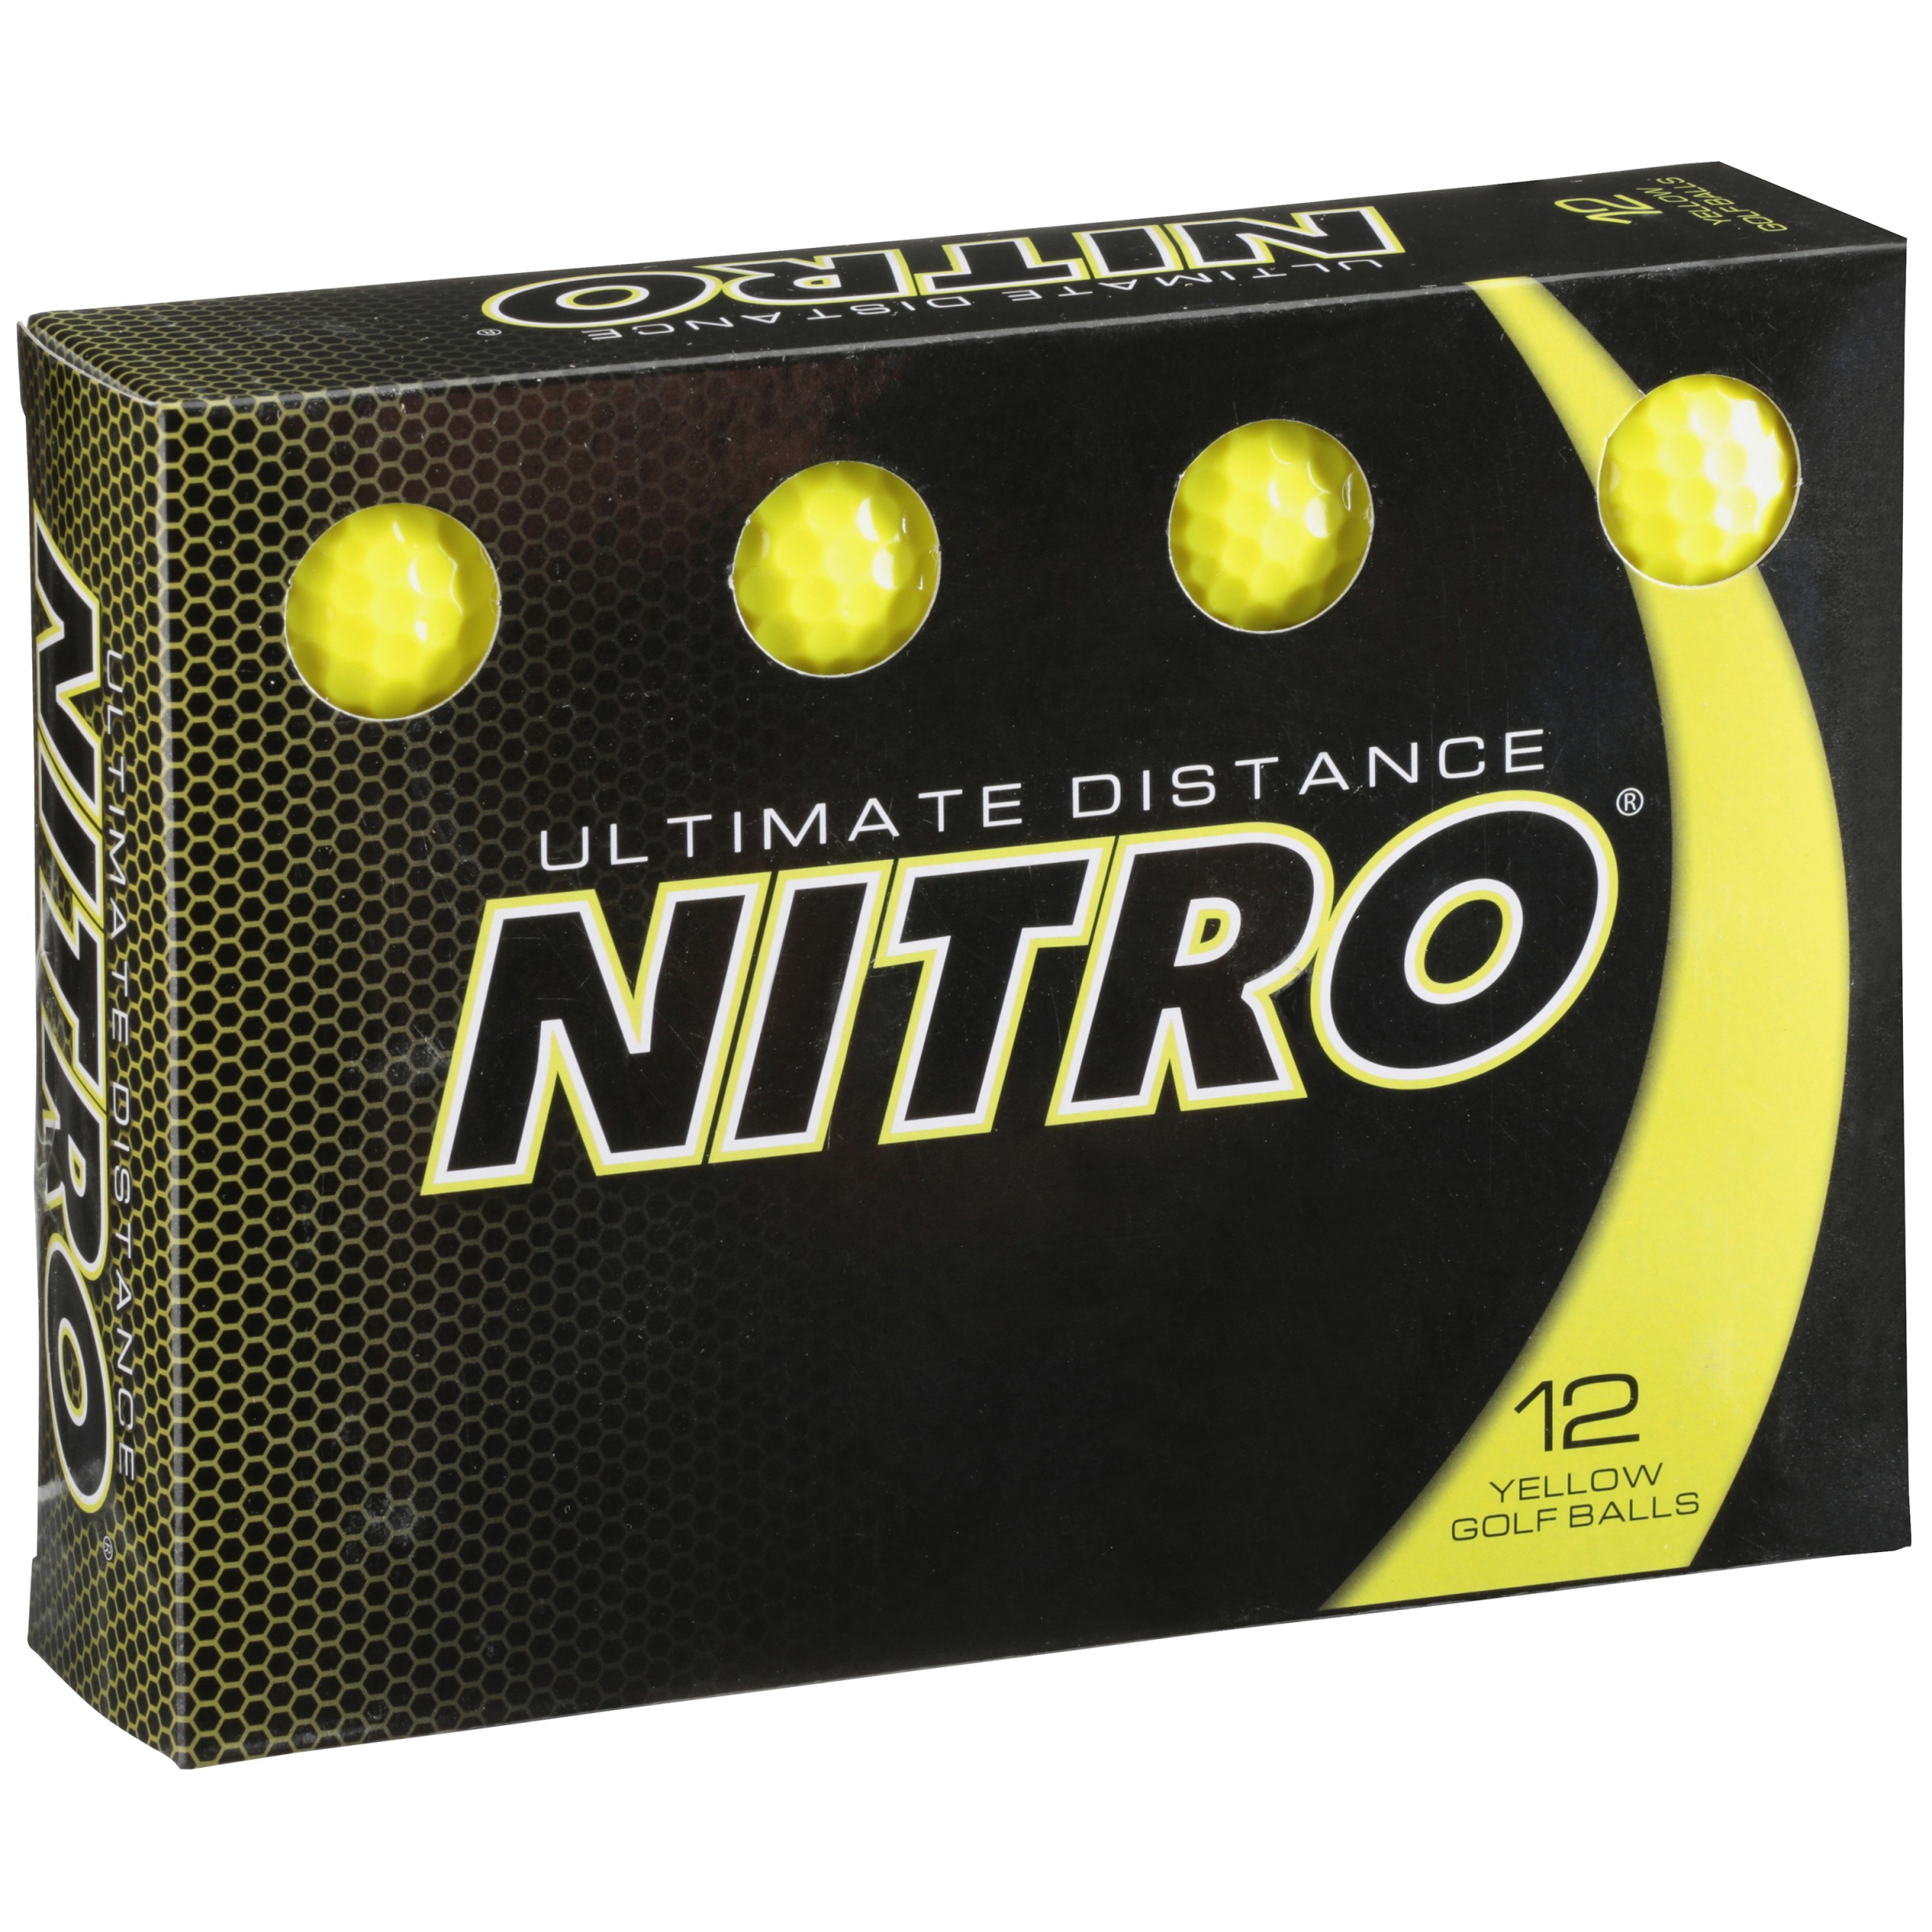 Nitro Golf Ultimate Distance Golf Balls, Yellow, 12 Pack - image 3 of 9